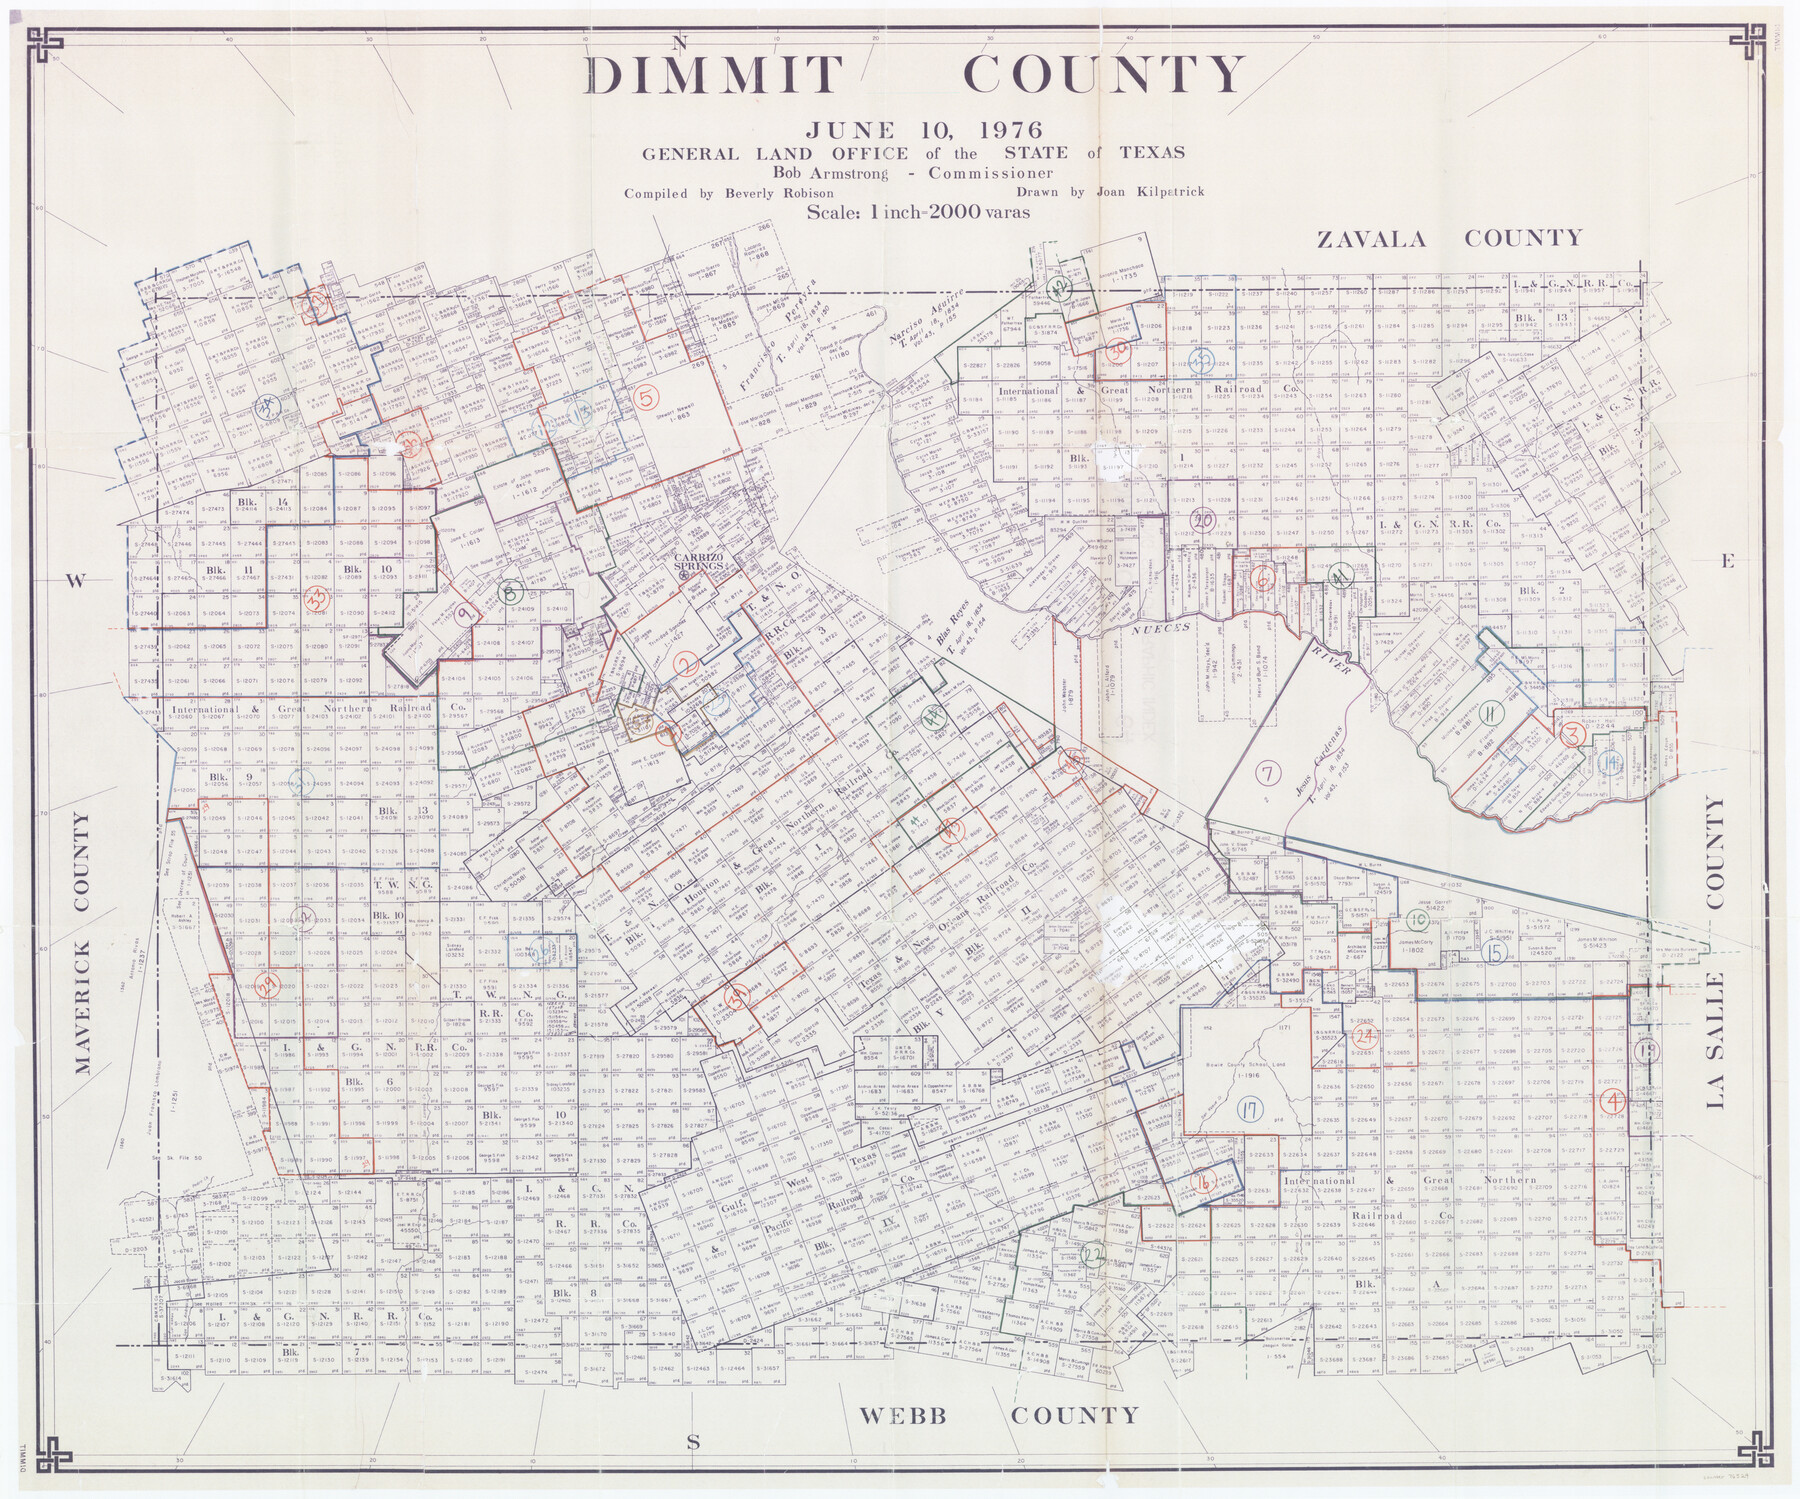 76524, Dimmit County Working Sketch Graphic Index - sheet A, General Map Collection